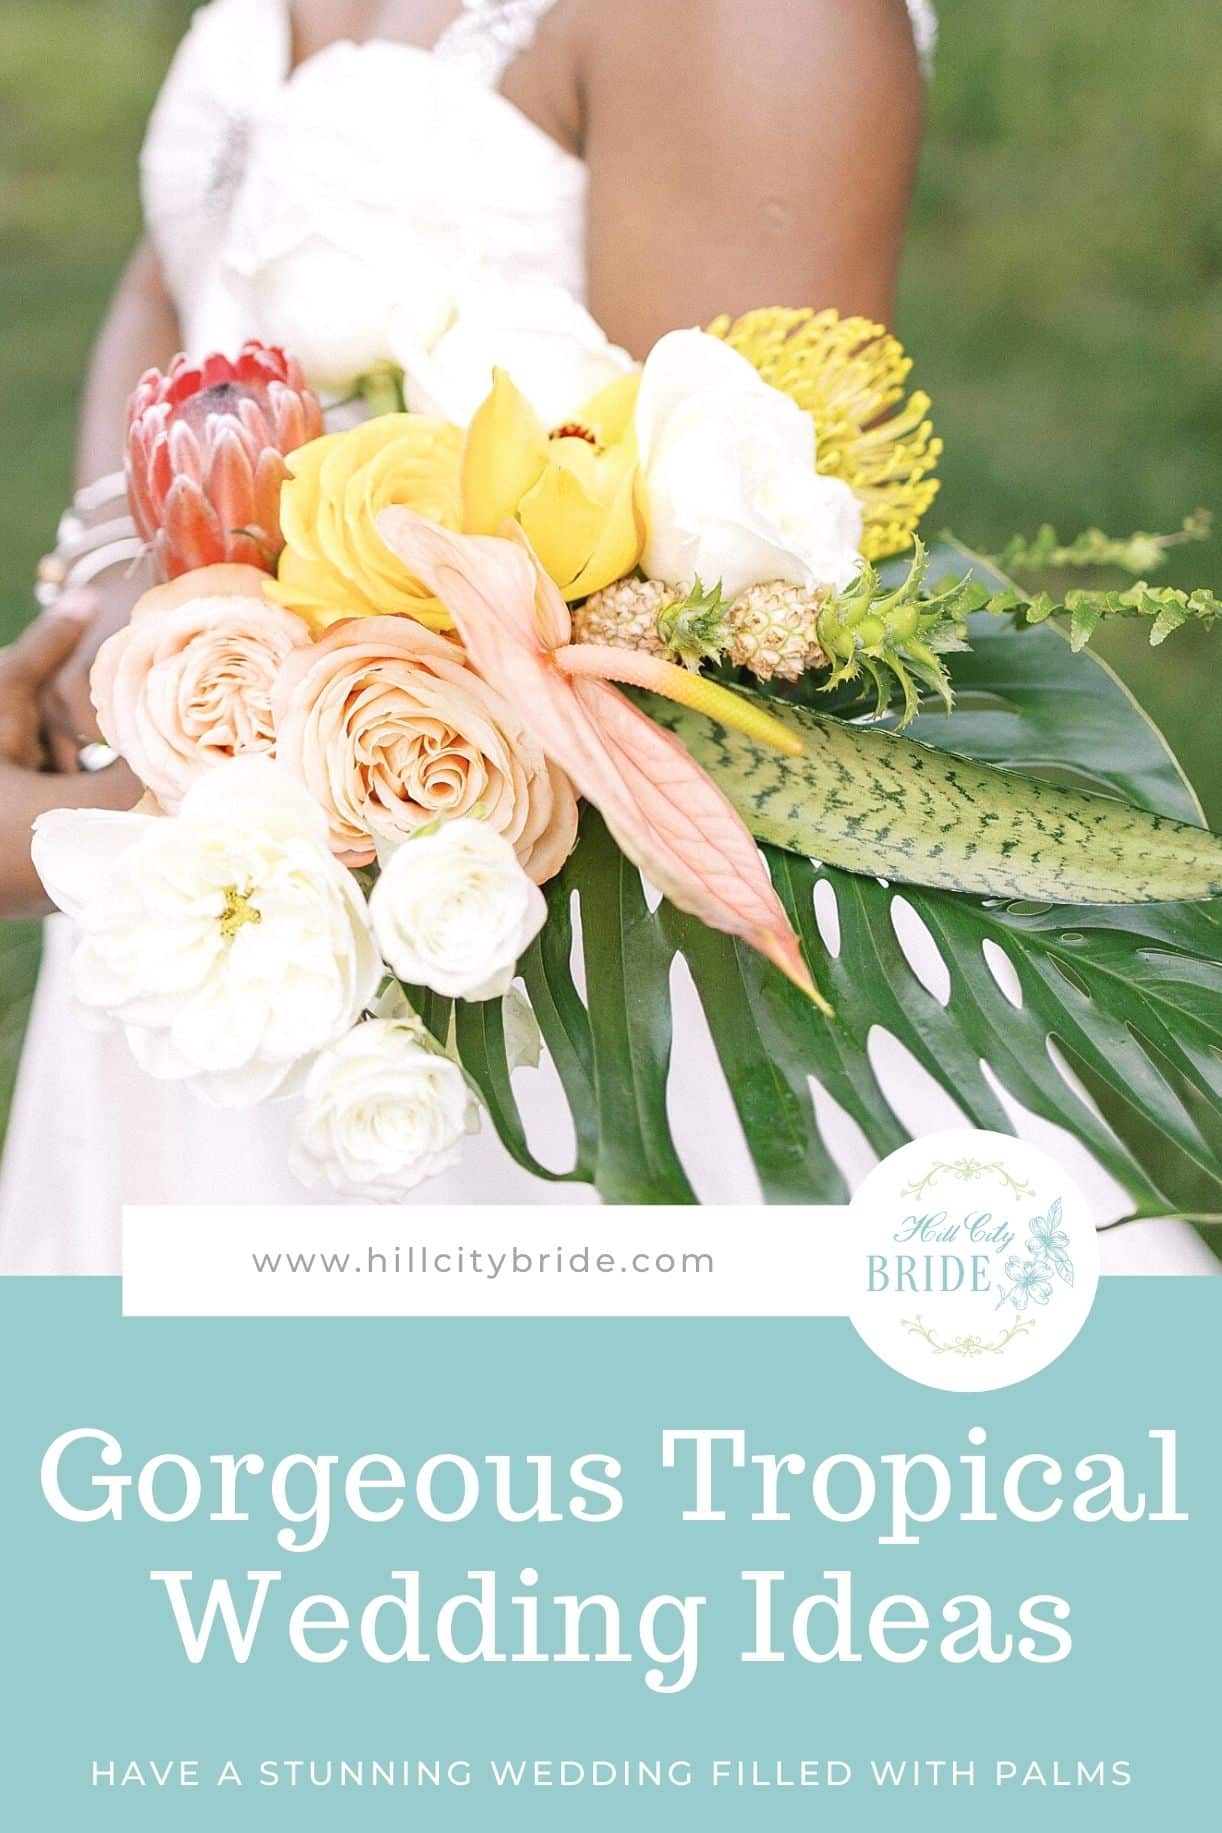 How to Use Tropical Wedding Inspiration